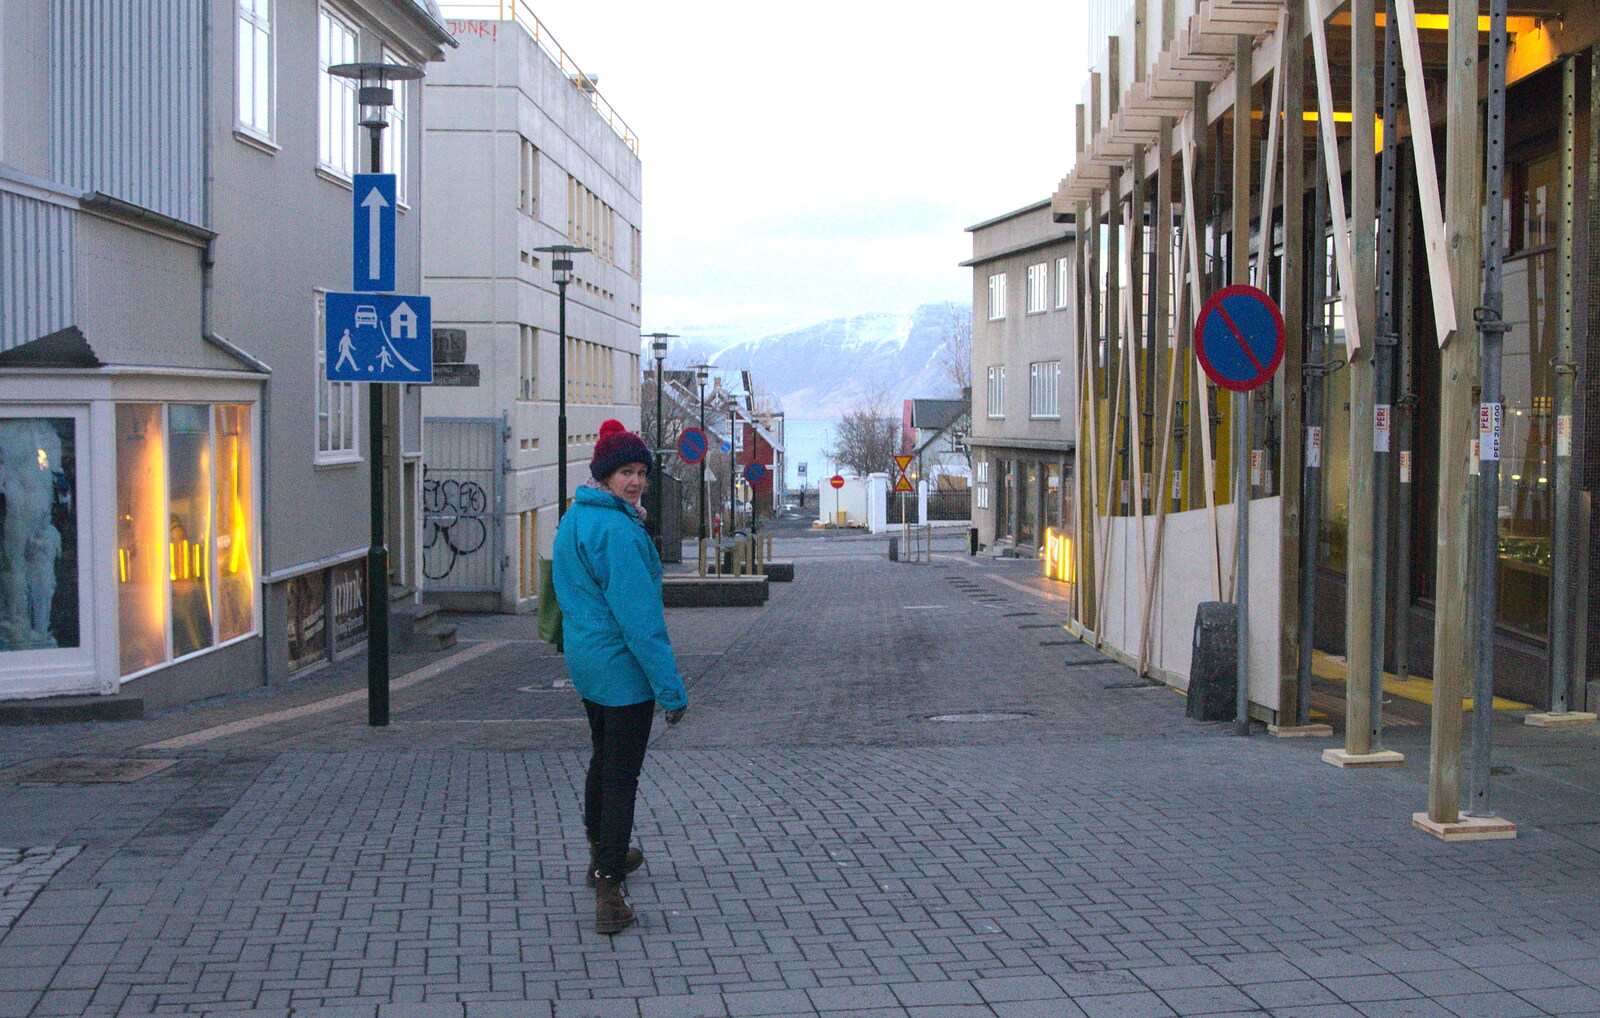 Isobel looks back from A Trip to Reykjavik, Iceland - 20th April 2017